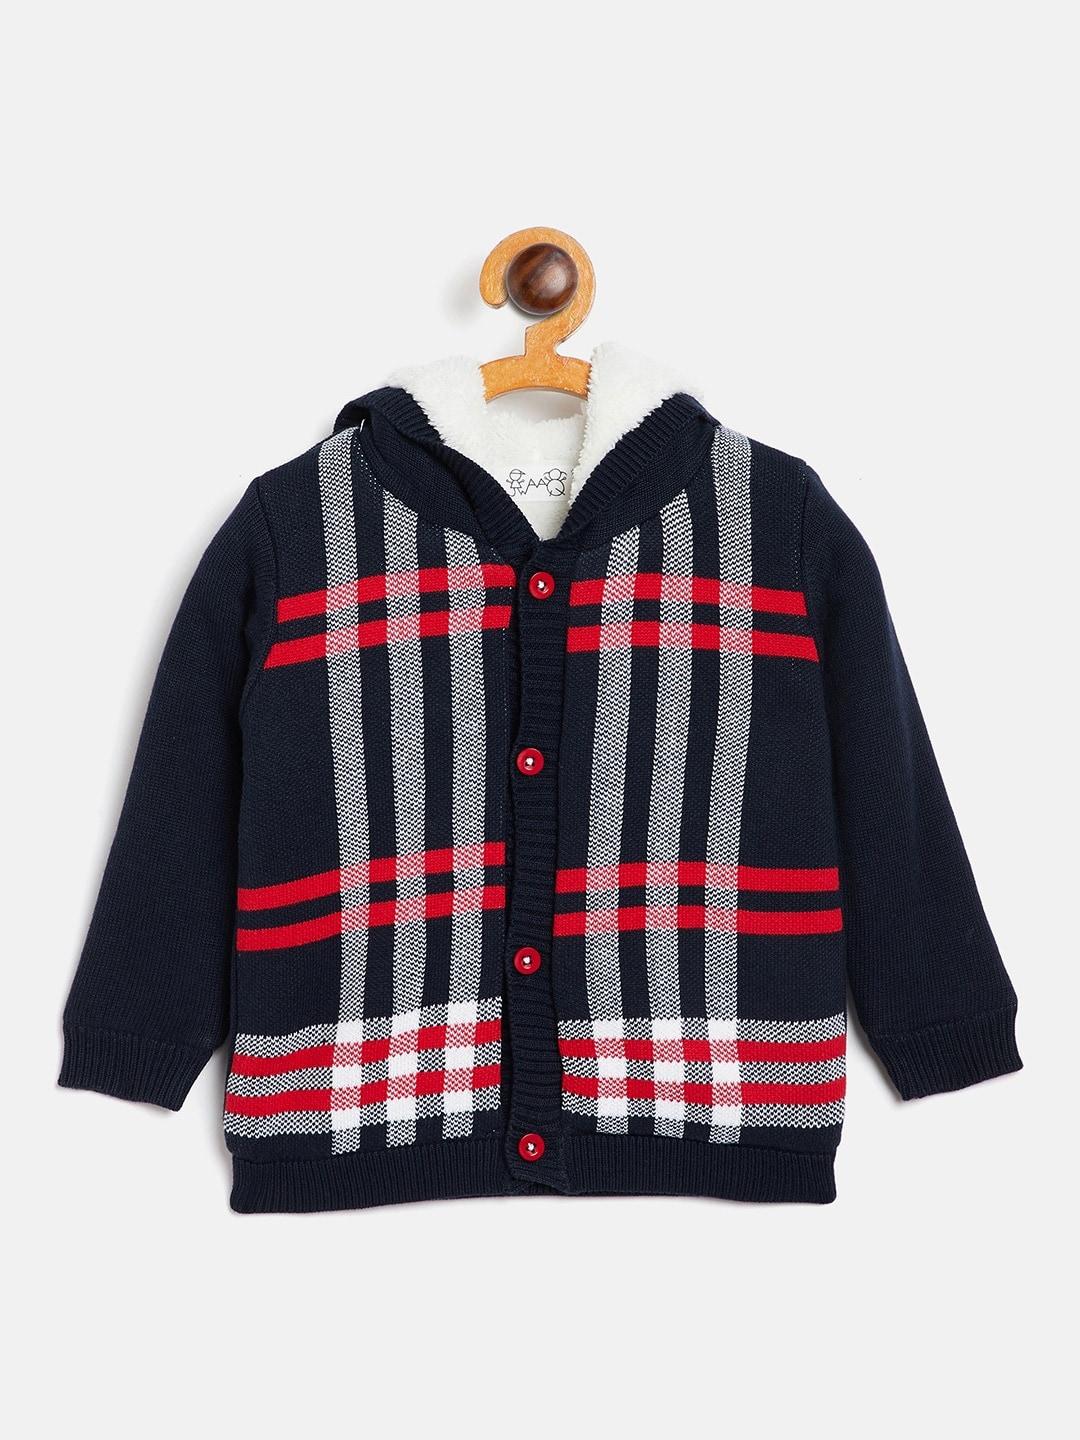 JWAAQ Boys Navy Blue & Red Printed Pullover